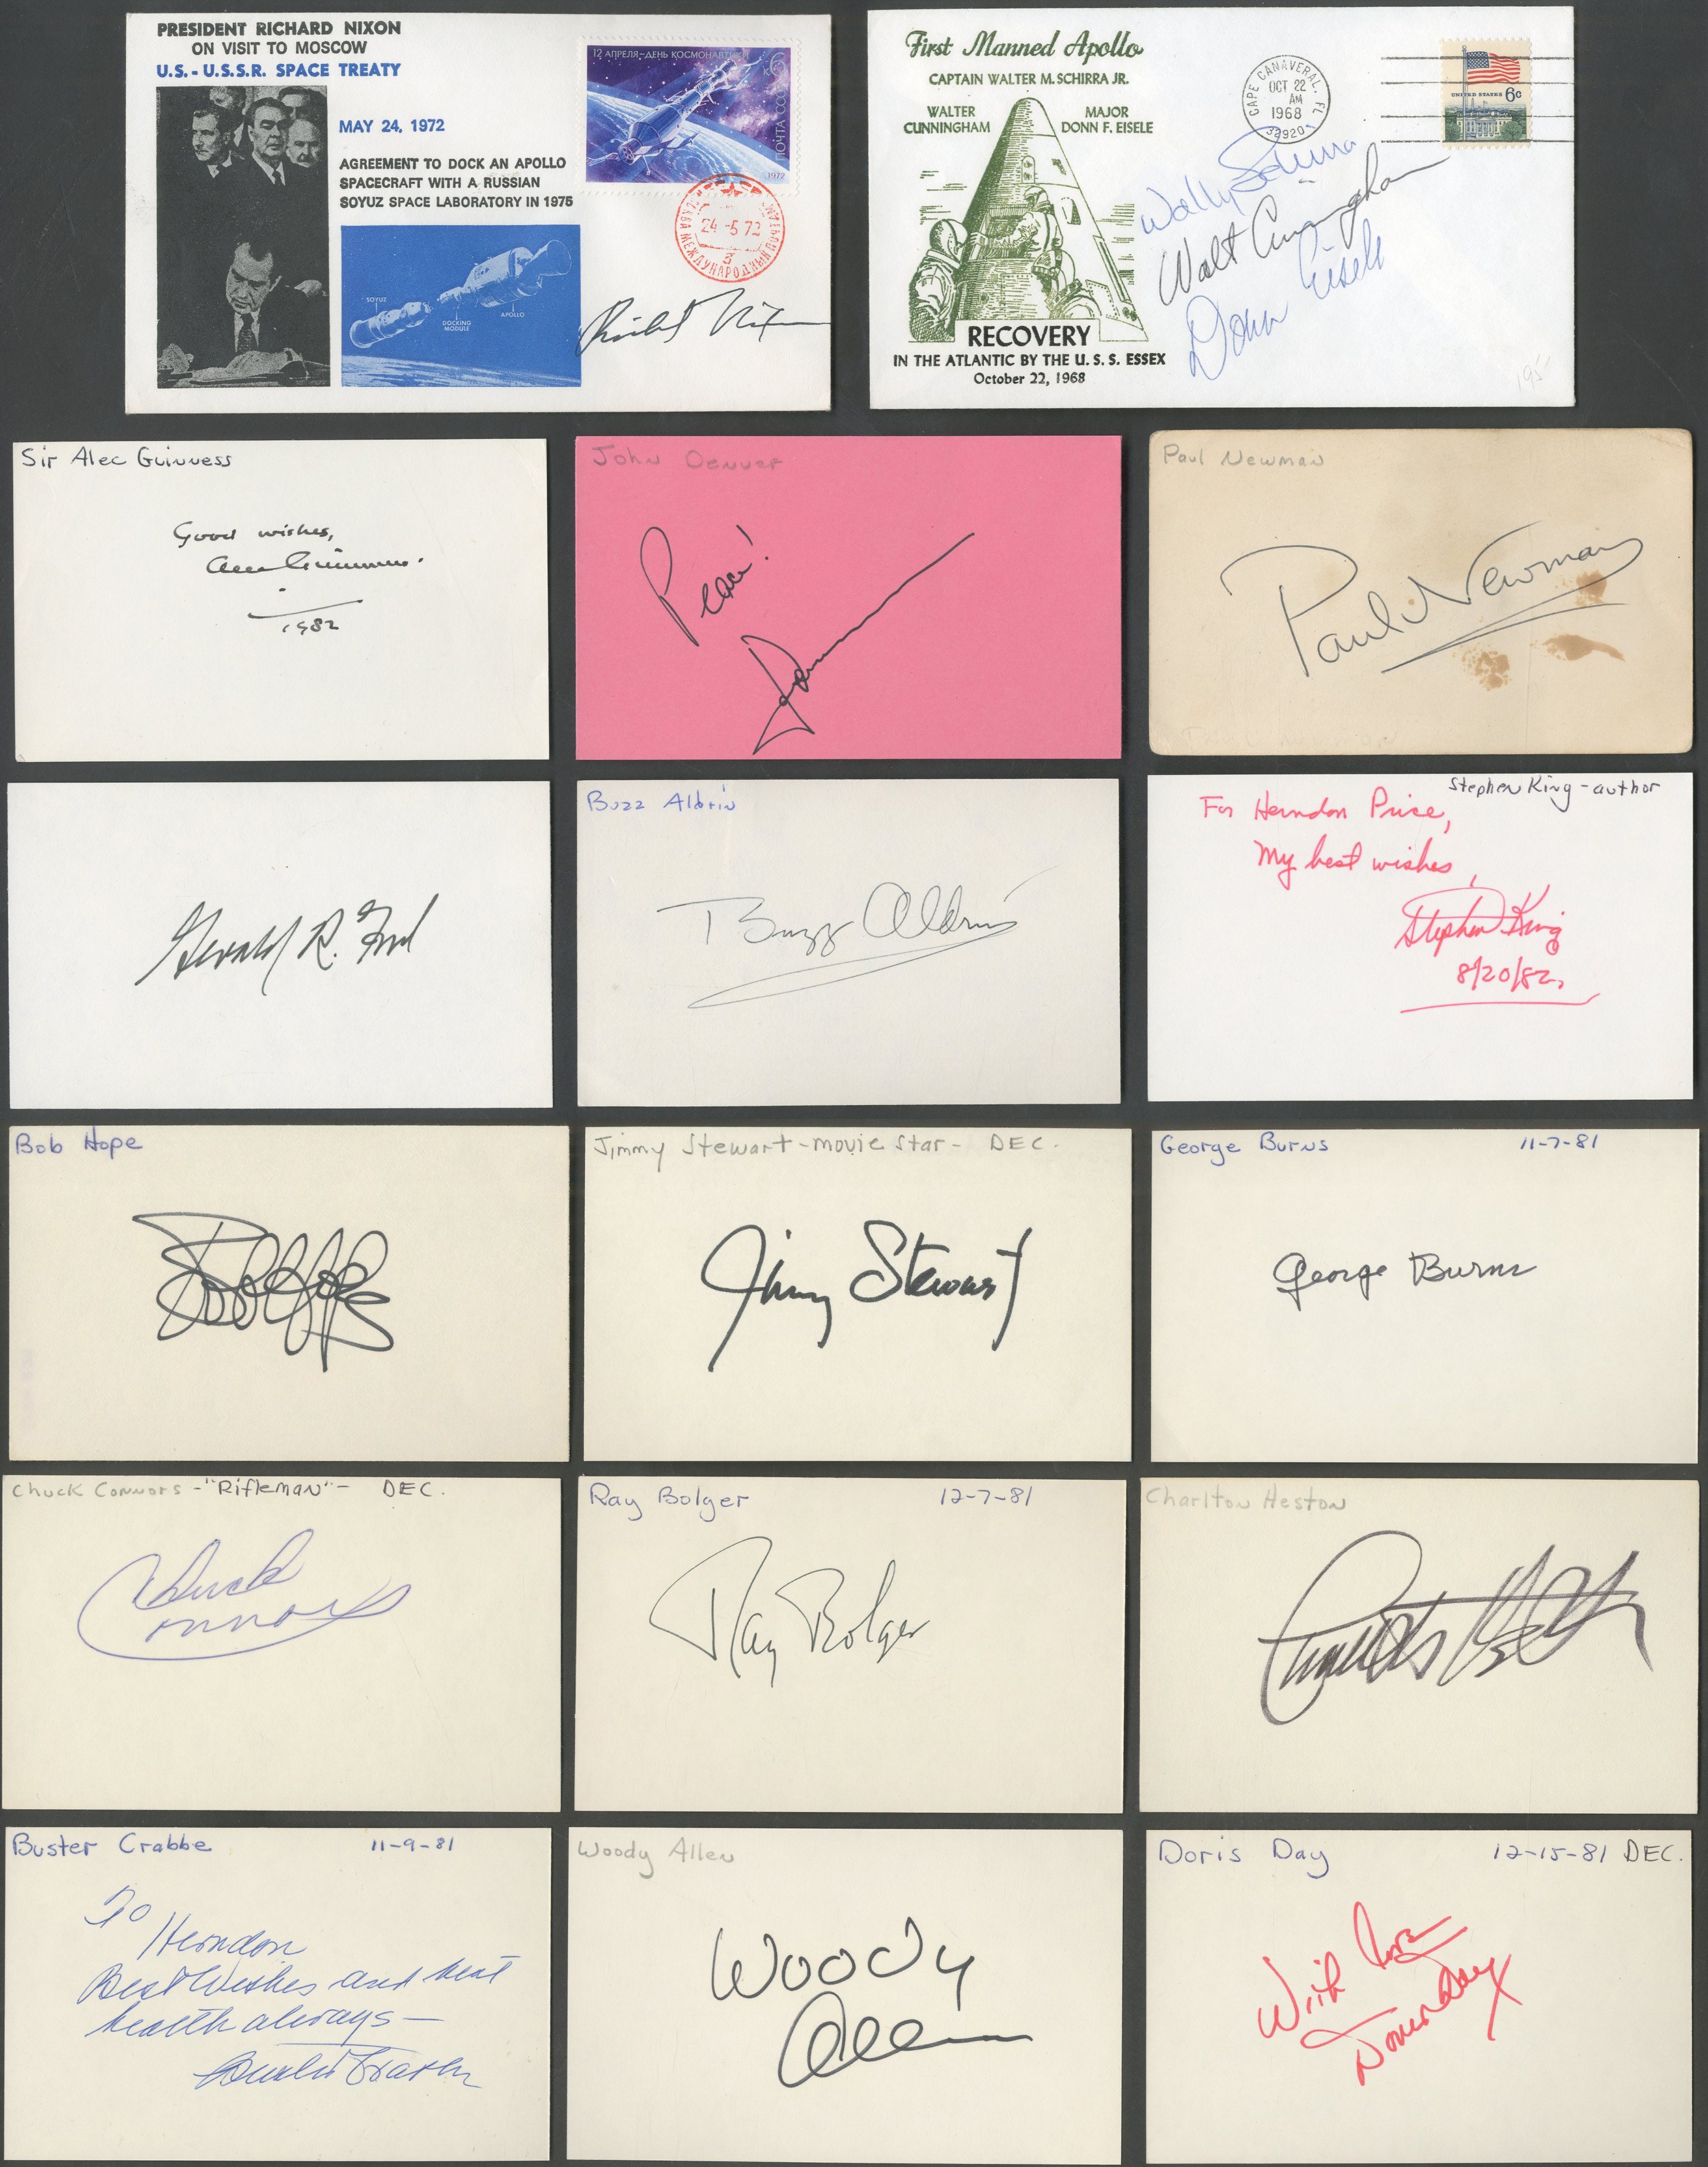 Rock And Pop Culture - Magnificent Pop Culture Autograph Collection with Major Names & Presidents (750+)